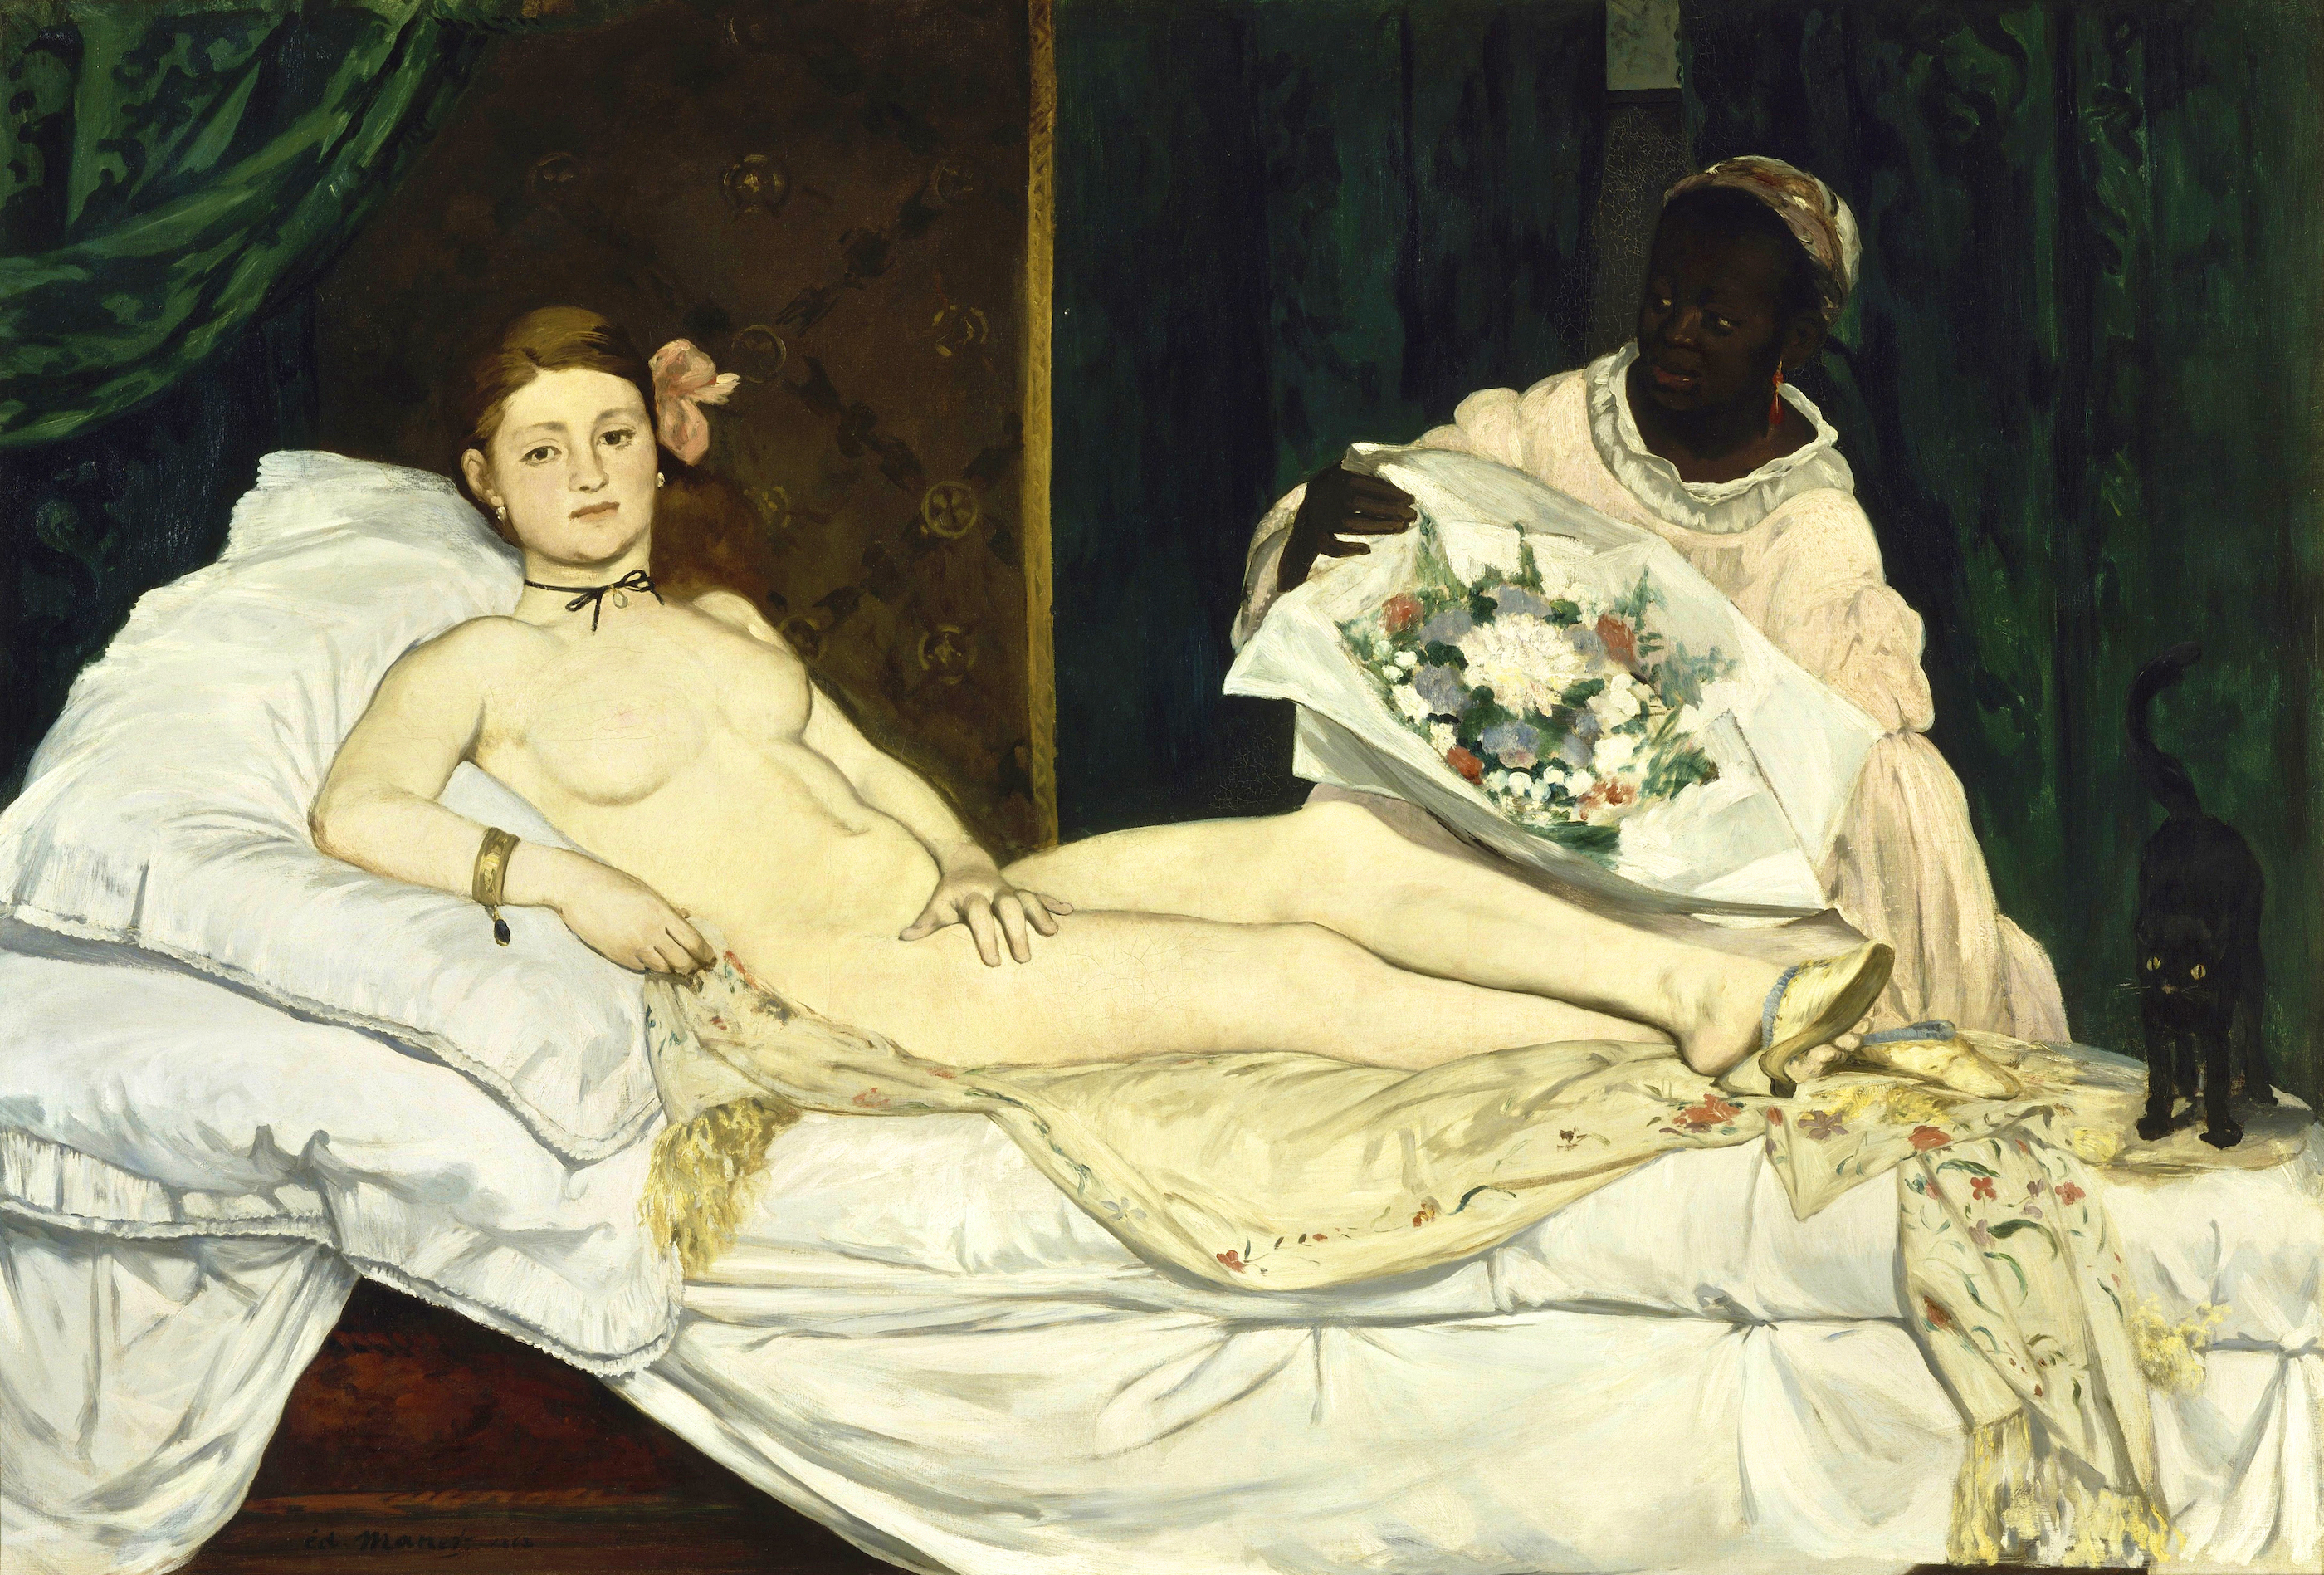 Olympia by Édouard Manet - 1863 - 130 x 190 cm Musée d'Orsay